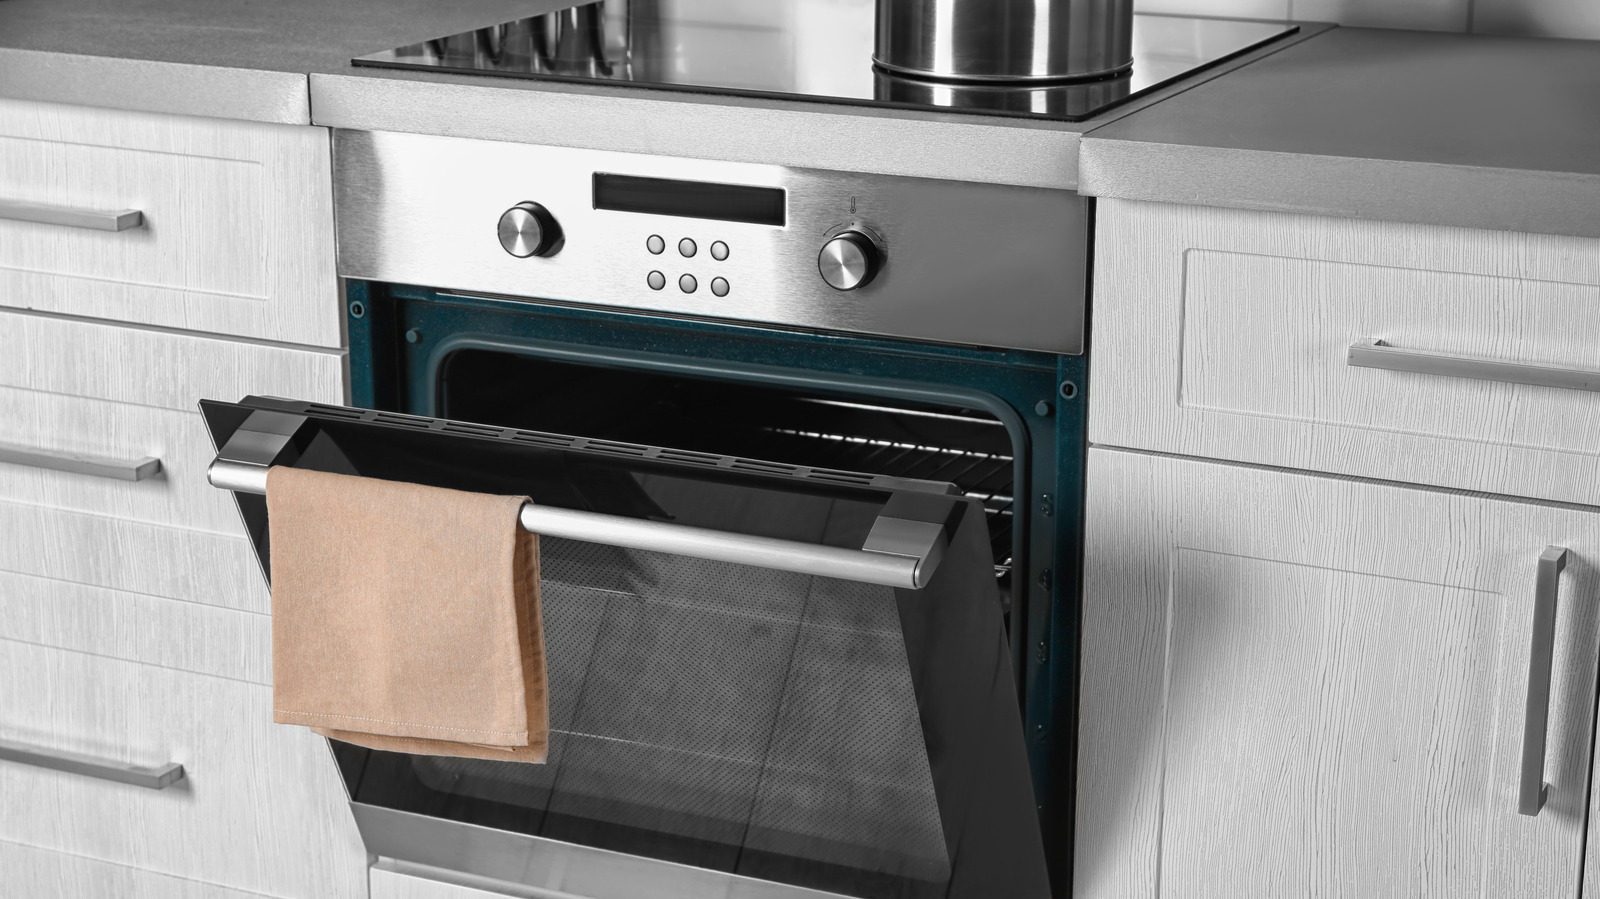 11 Facts You Need To Know About Electric Ovens